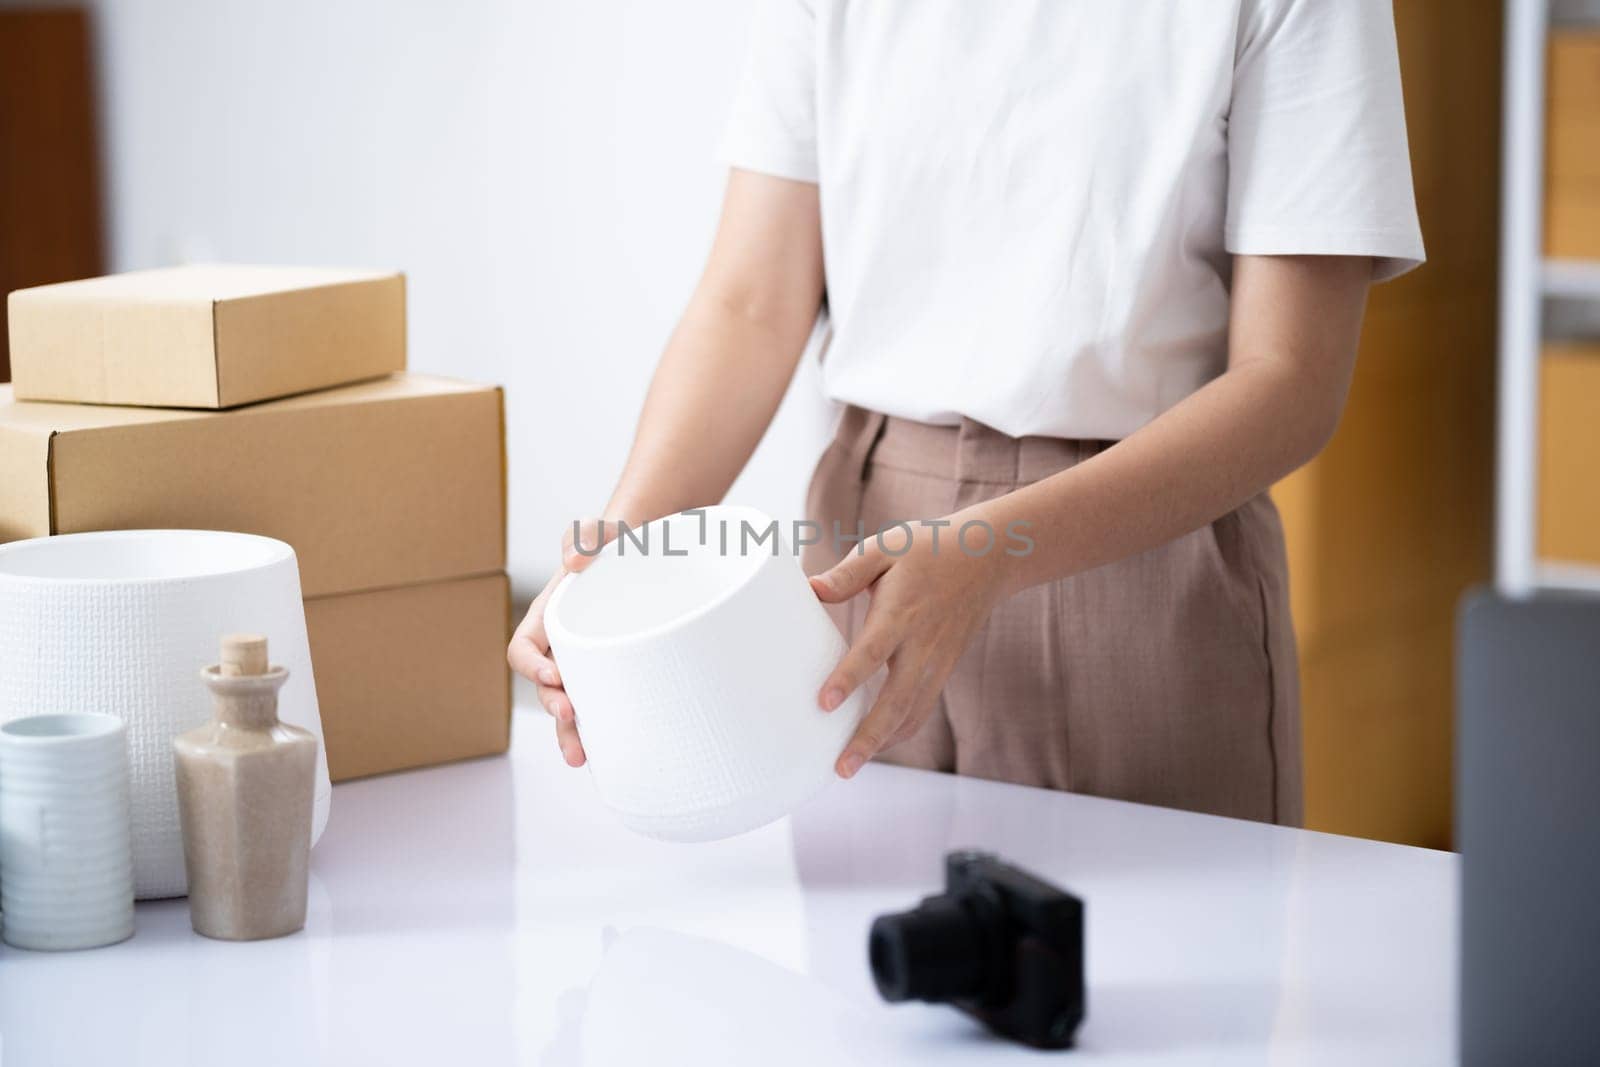 Attentive business owner thoroughly examining a product to ensure top quality before dispatch in her online shop workspace.